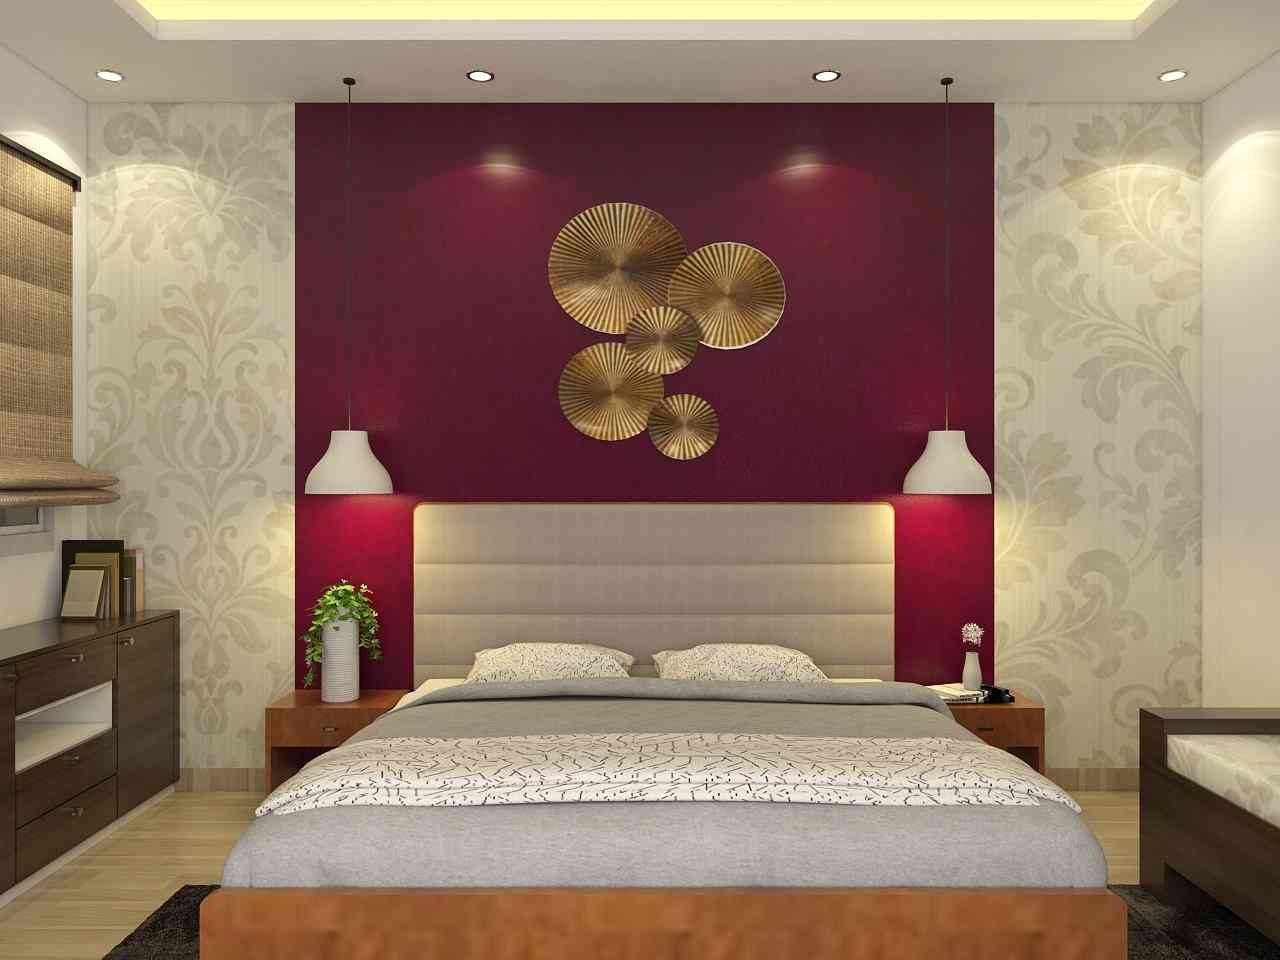 Modern Master Bedroom Design With Cardinal Red Interiors